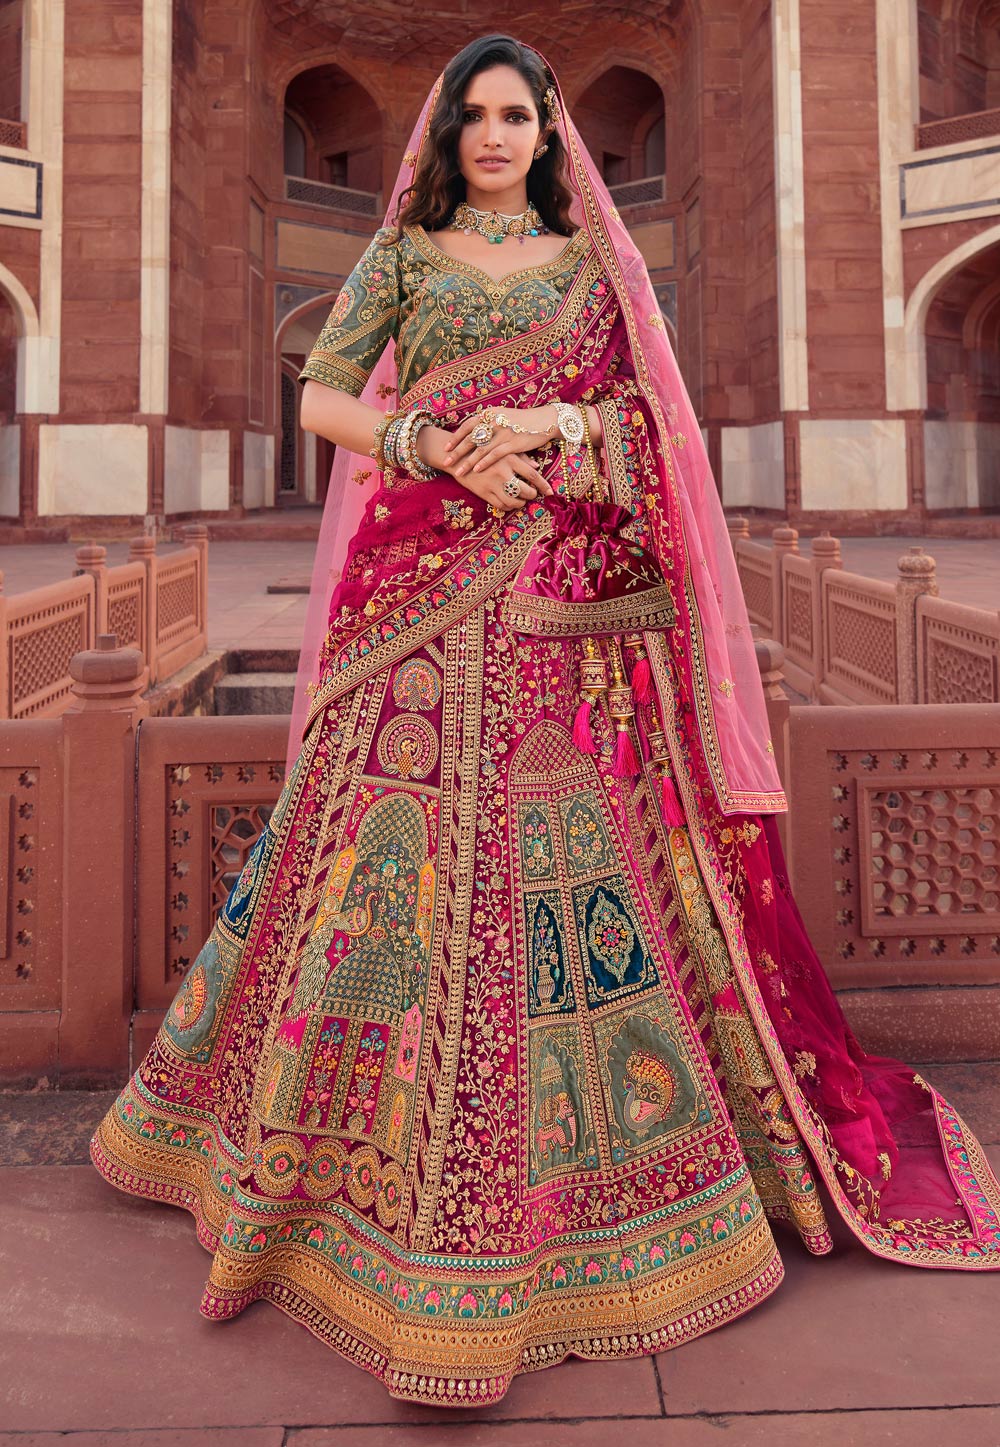 Ditch Red Lehenga Coz Magenta Lehengas Are In For Brides-To-Be! | Indian  wedding dress bridal lehenga, Indian bridal lehenga, Indian bridal outfits